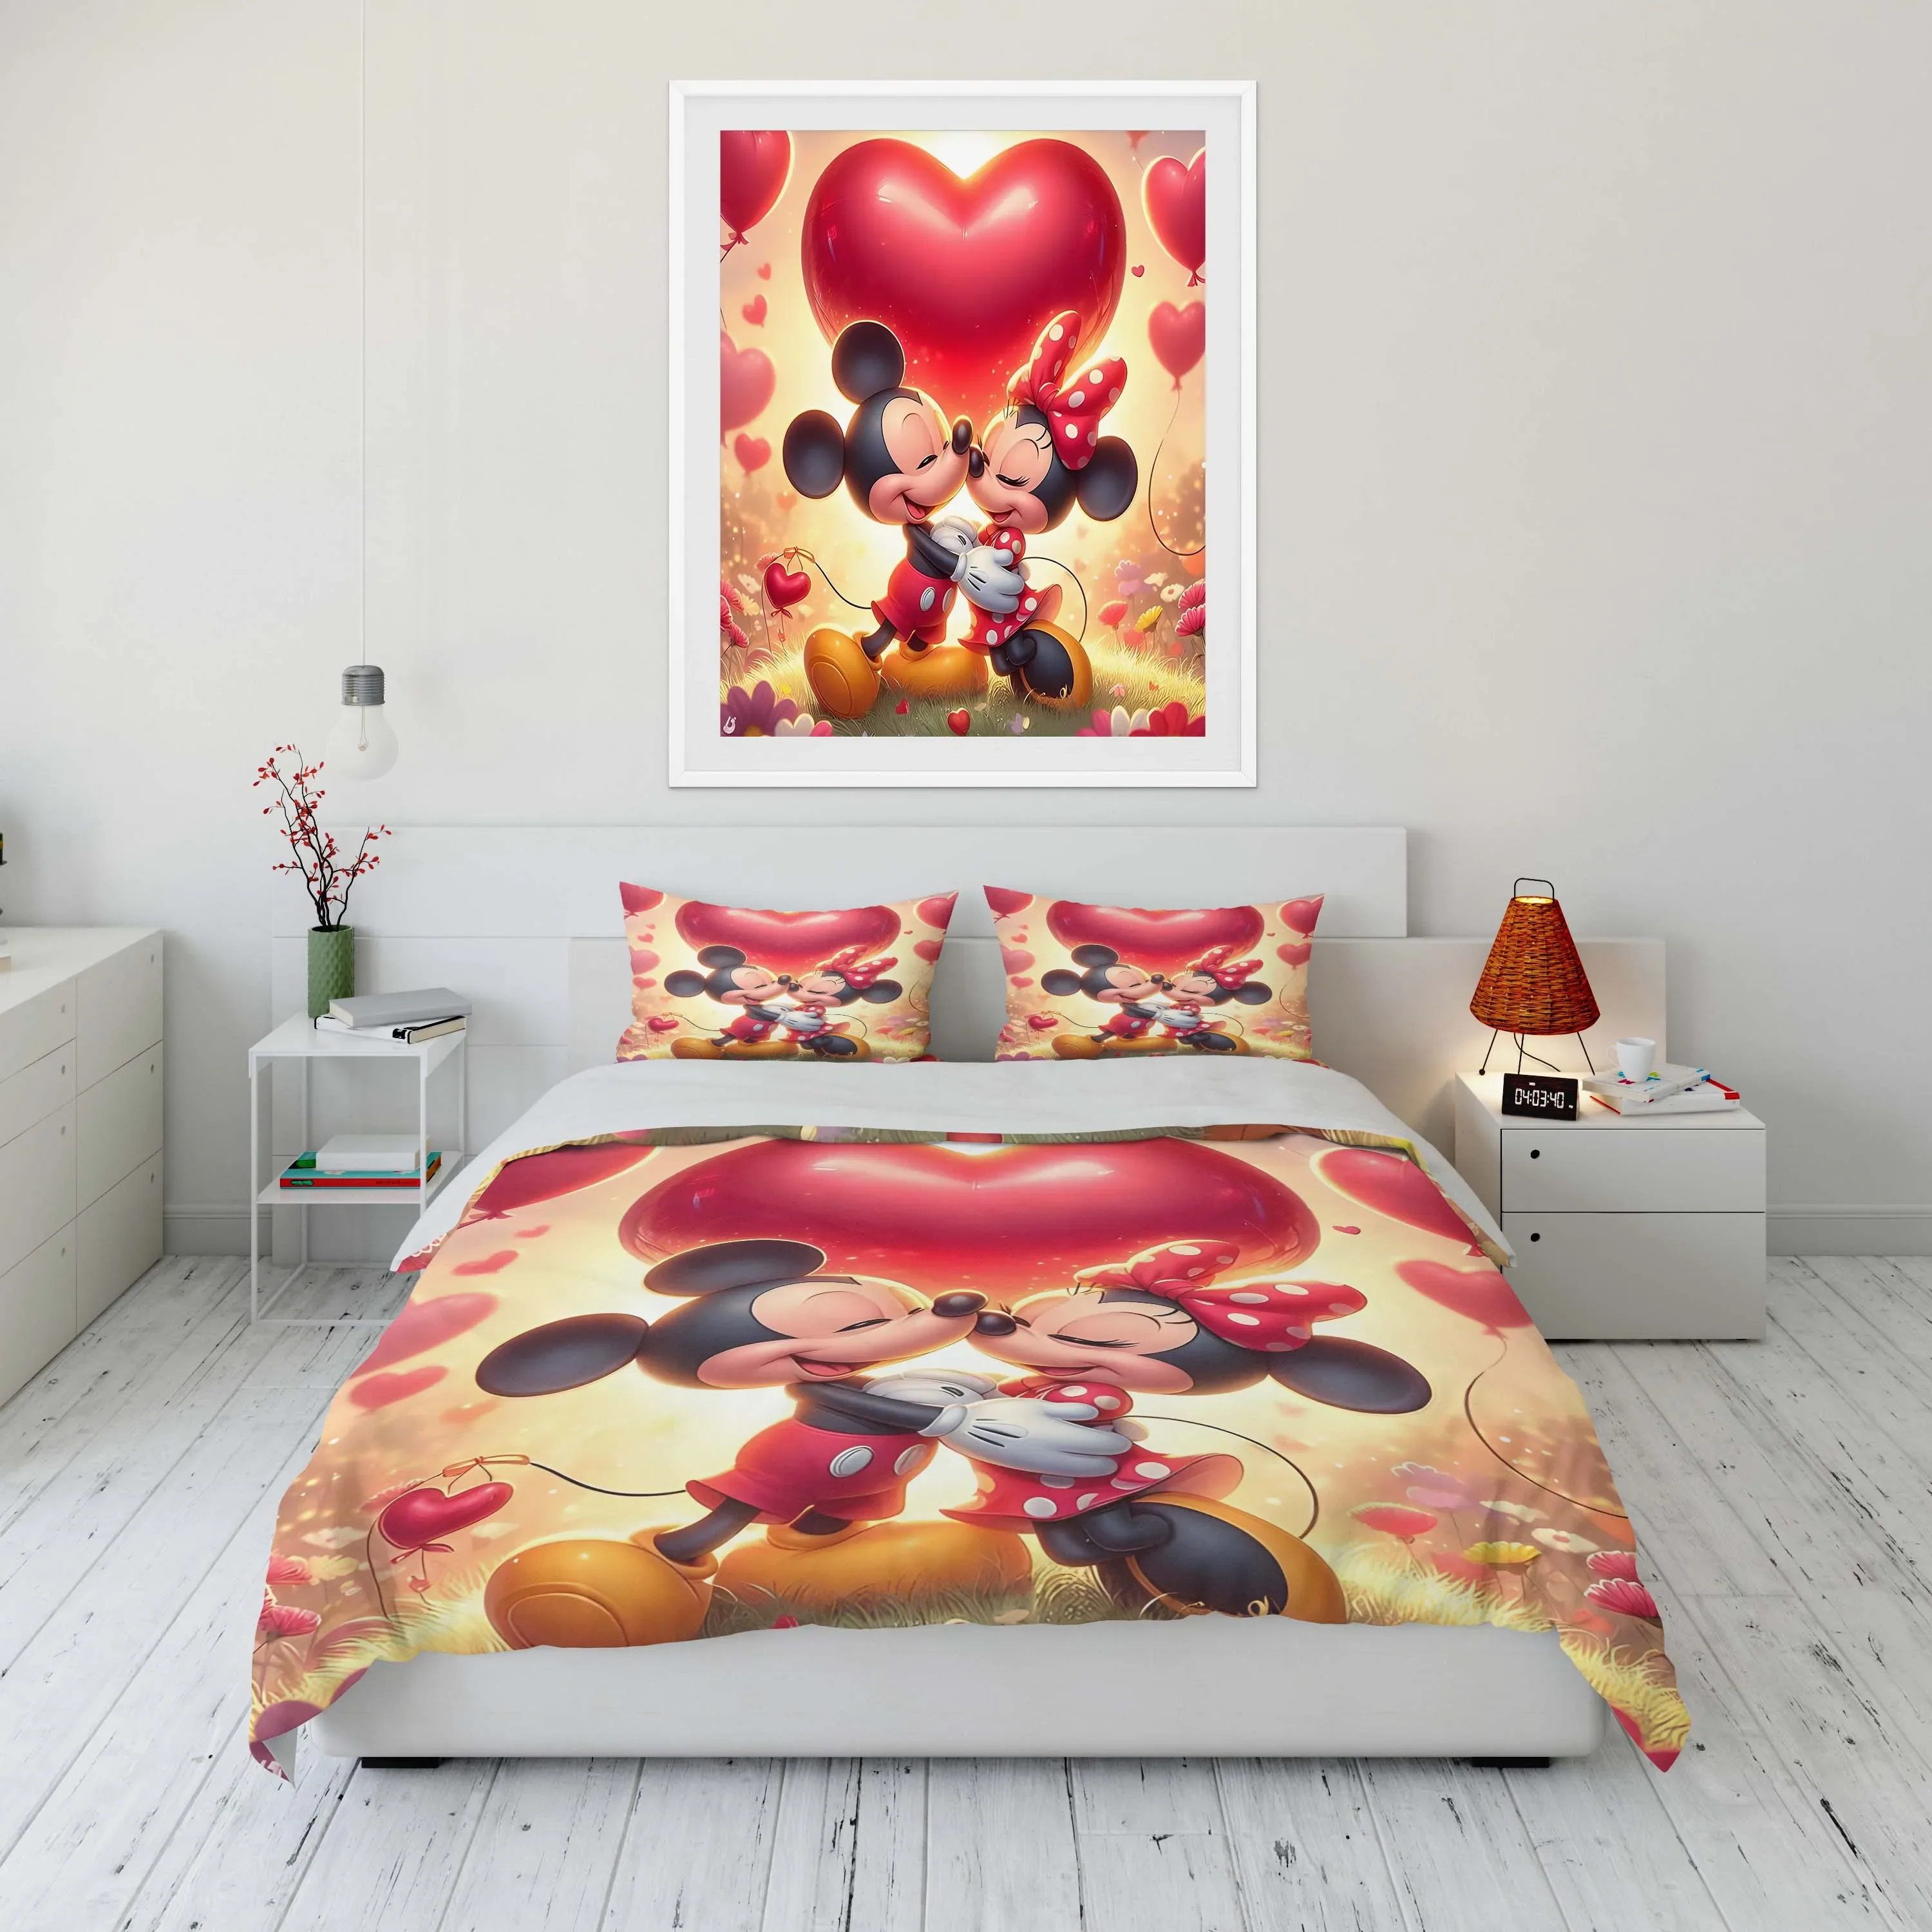 

Disney Mickey Minnie Mouse Printed Soft Bedding Set Duvet Cover Anime Quilt Adult Kids Birthday Gift Full Size Queen Bedding Set